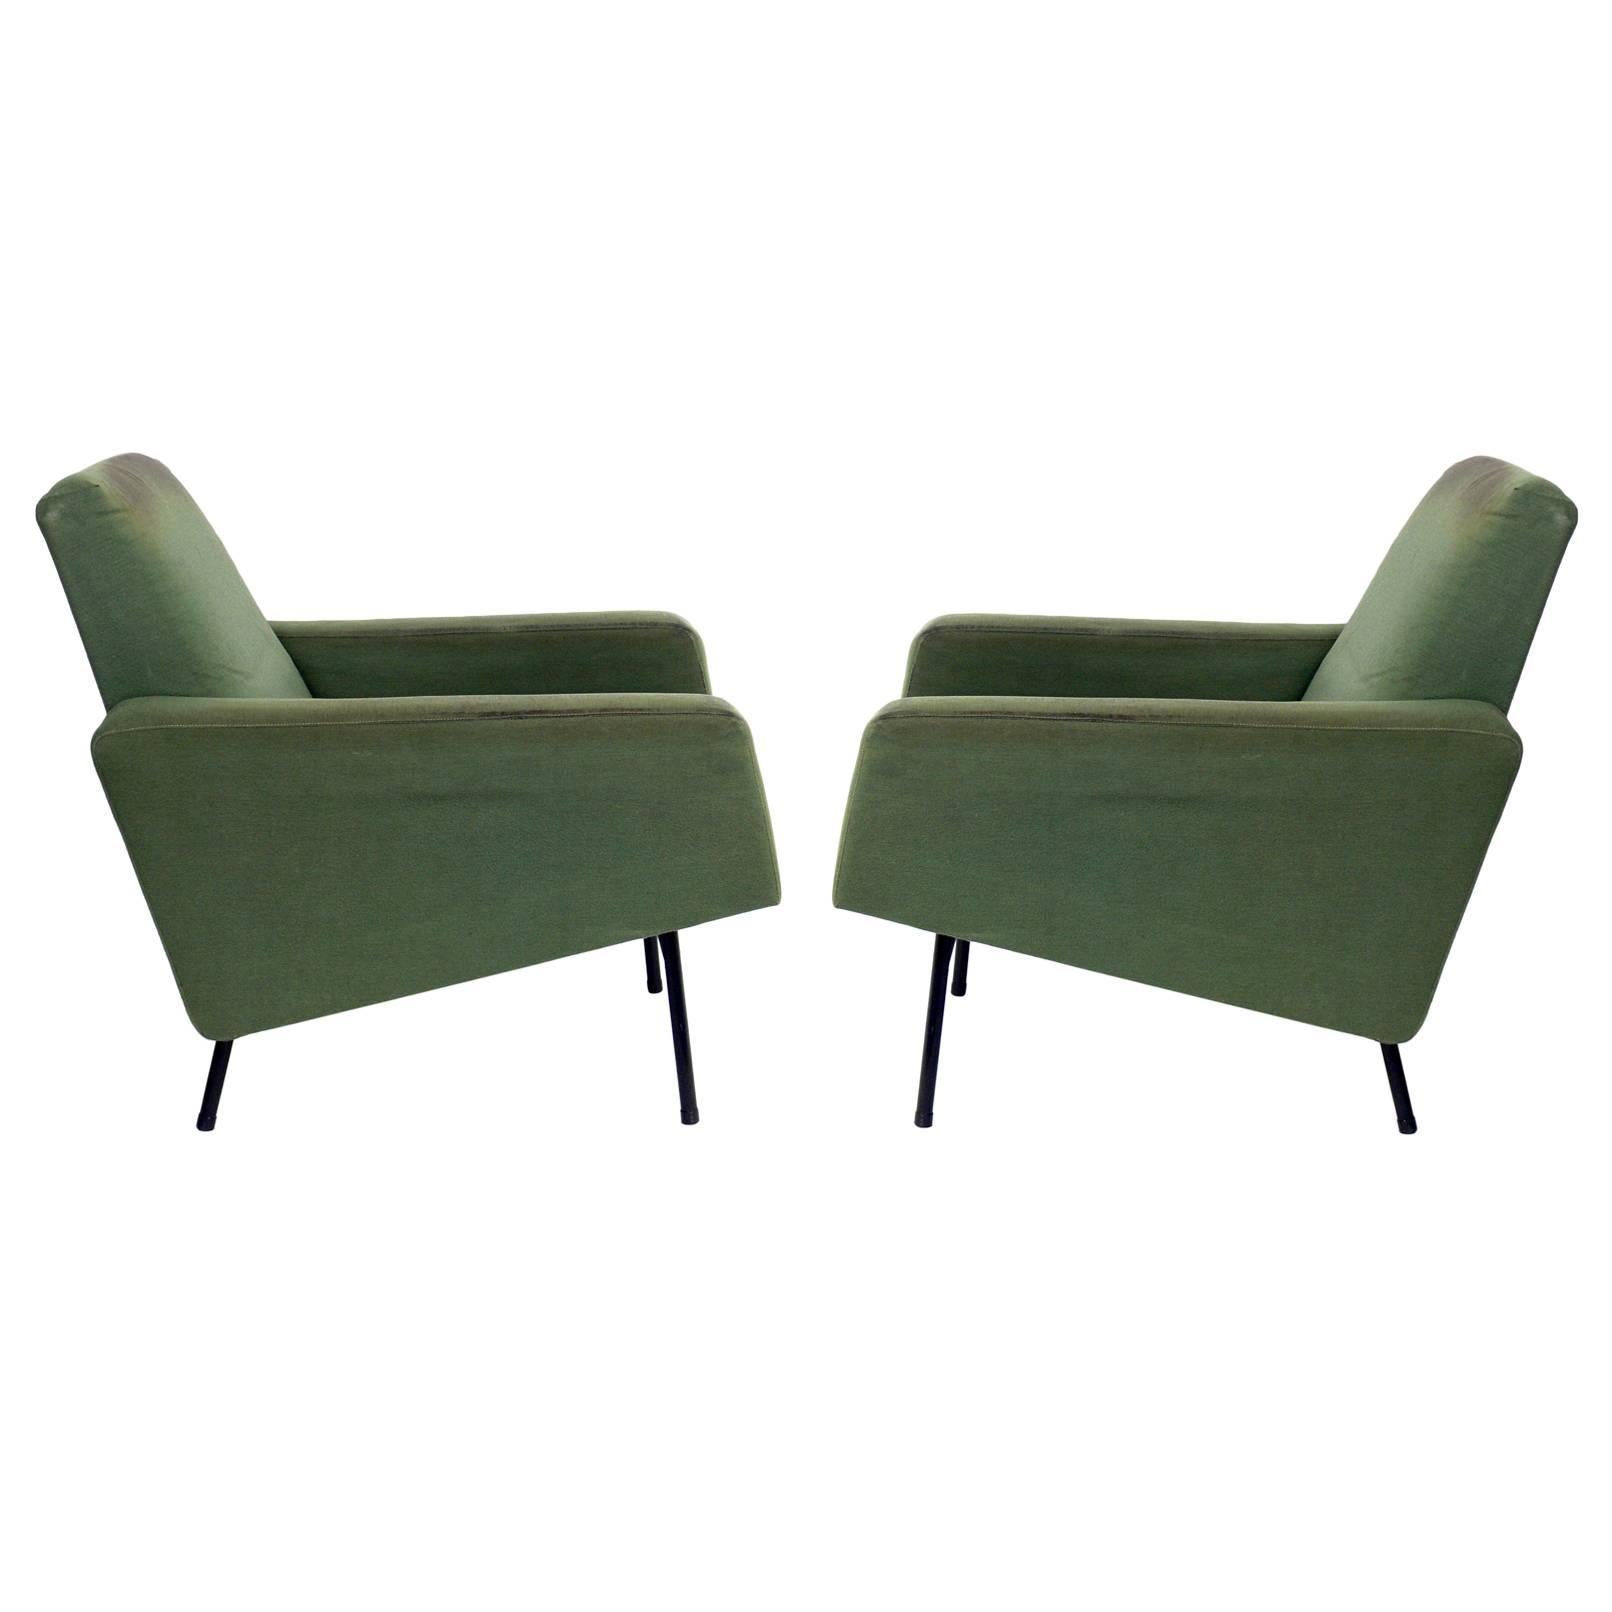 Pair of Modern Lounge Chairs by Pierre Guariche for Airborne